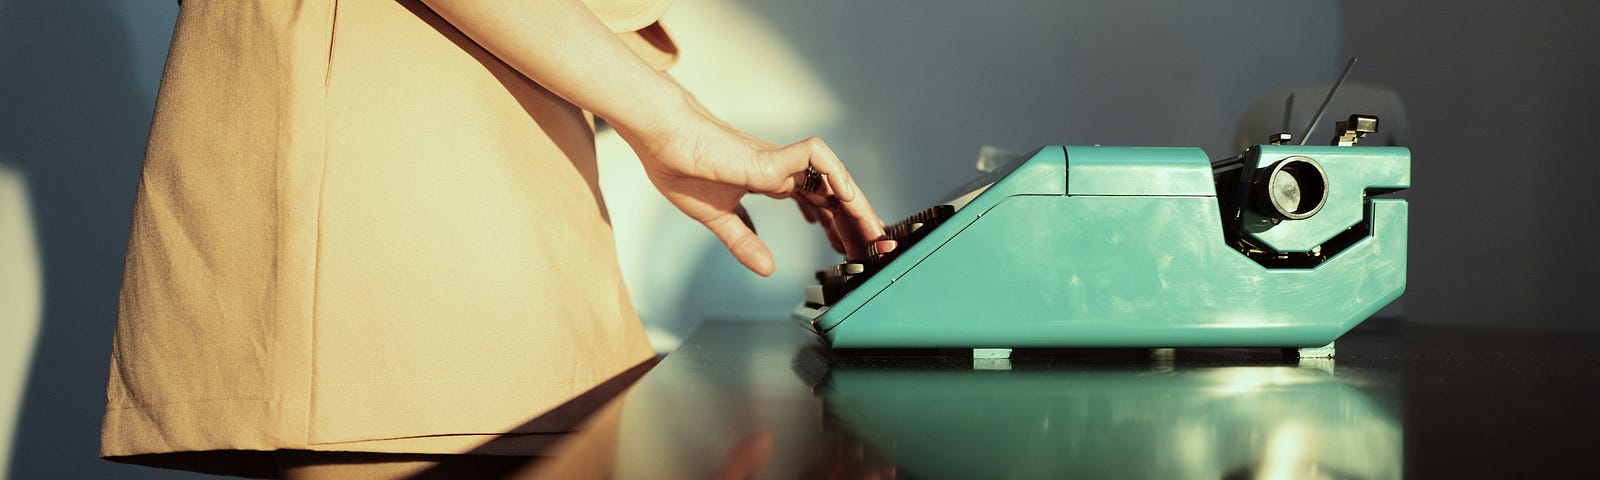 A woman stands next to a turquoise typewriter